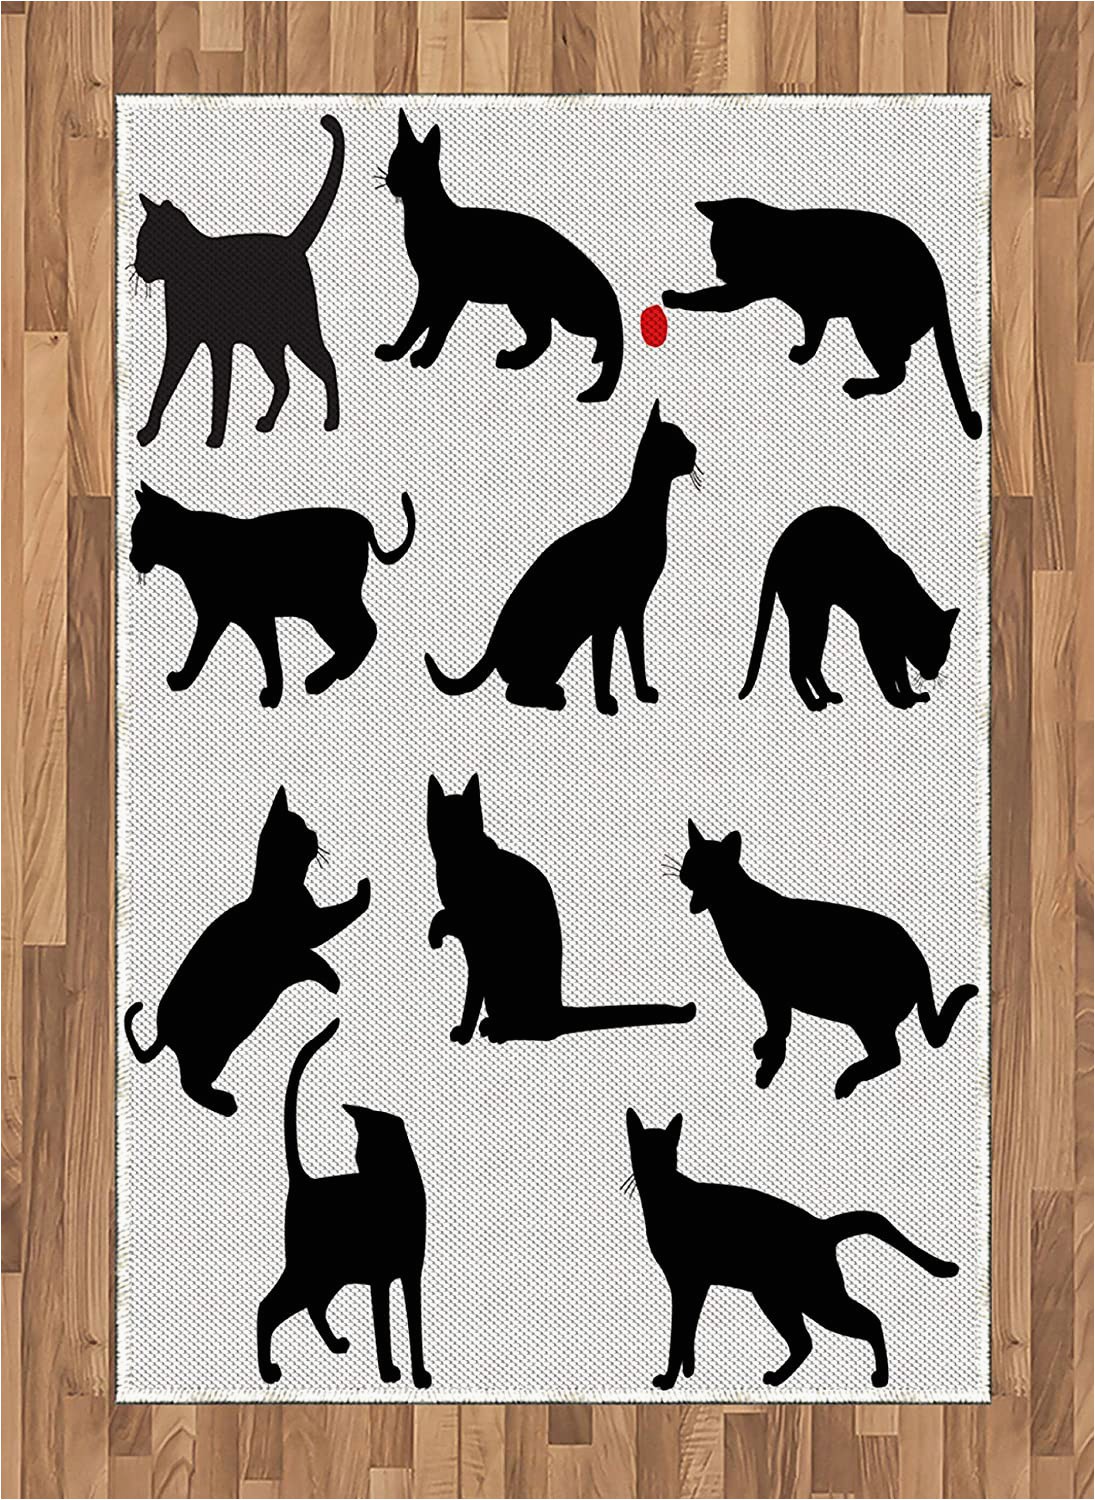 Dog Paw Print area Rugs Buy Ambesonne Cat area Rug Silhouette Of Kittens In Various